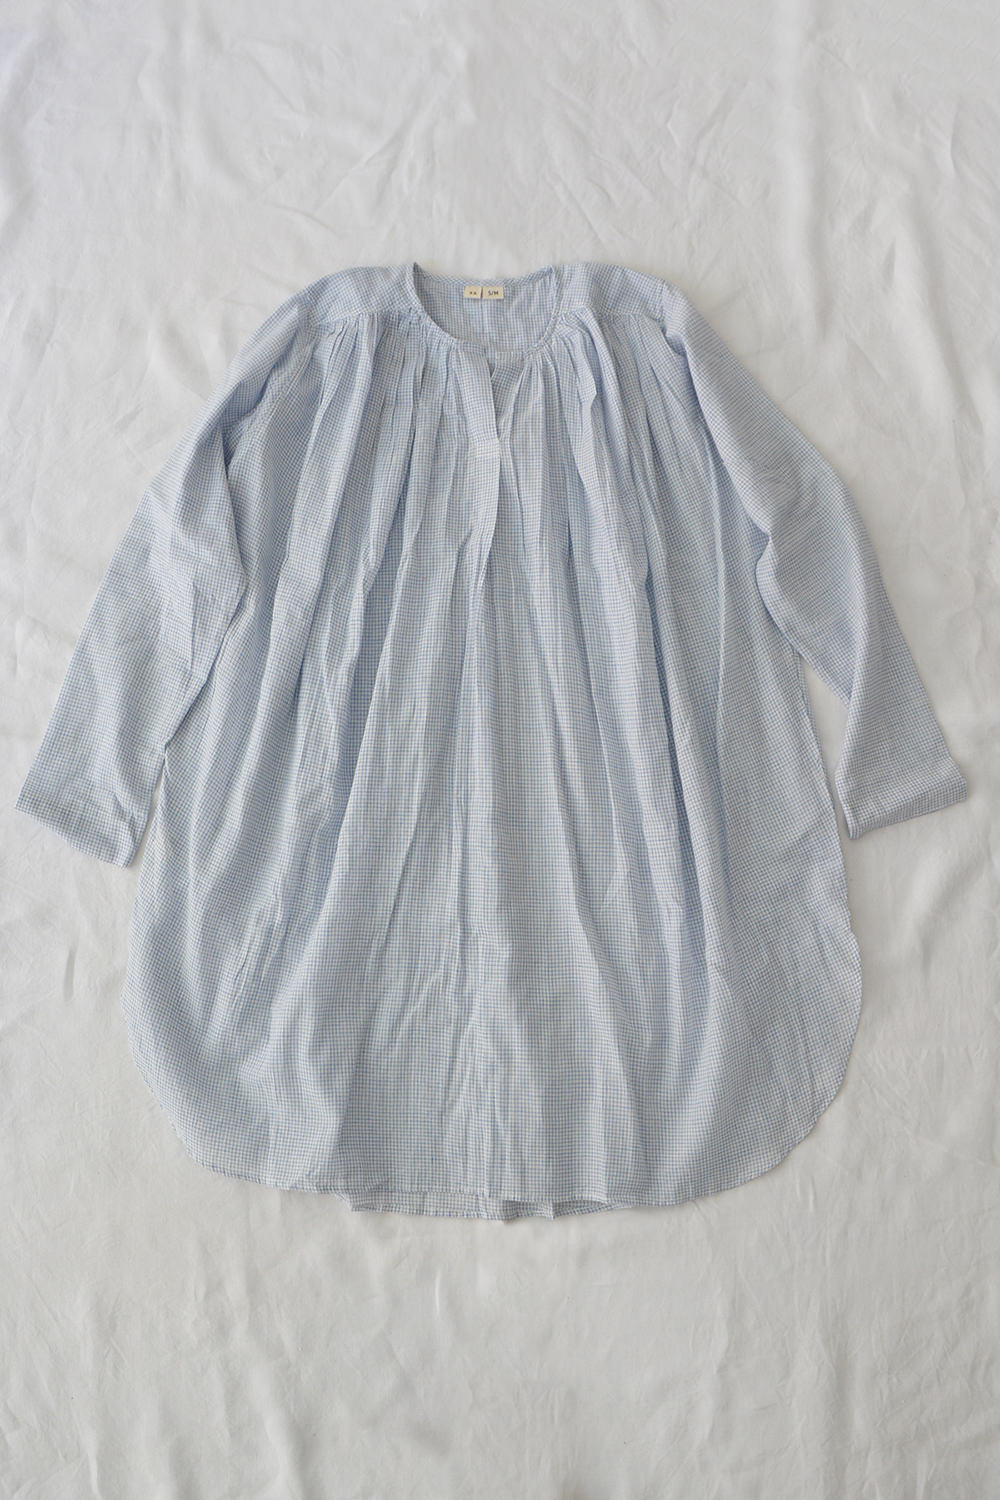 Runaway Bicycle Long Blouse Blue Gingham Top Picture